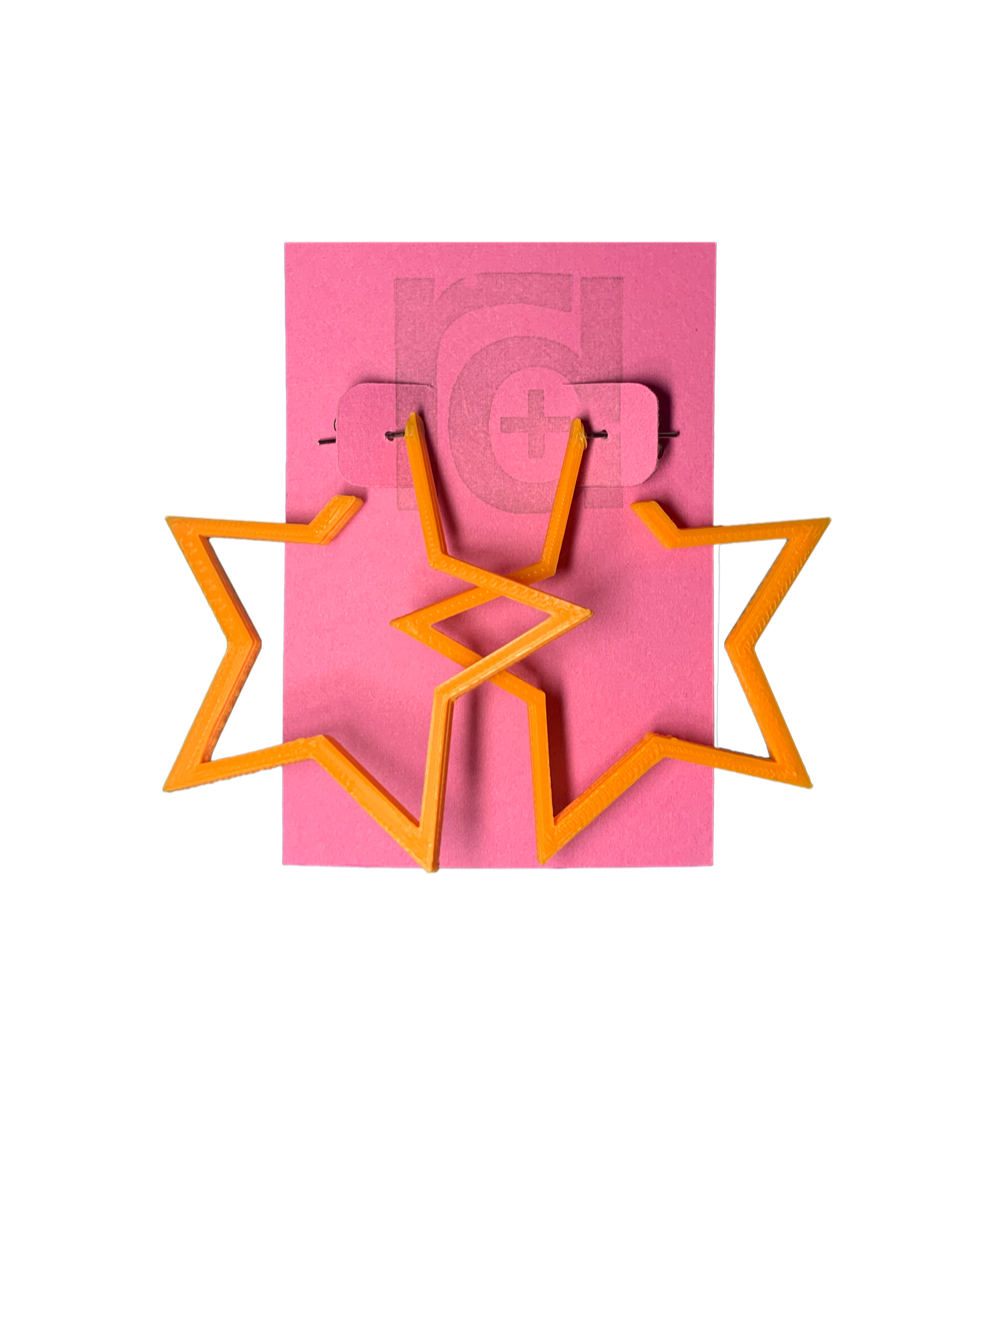 On a bright pink card are two R+D earrings. The earrings are orange star hoops that are 3D printed with a plant based filament.